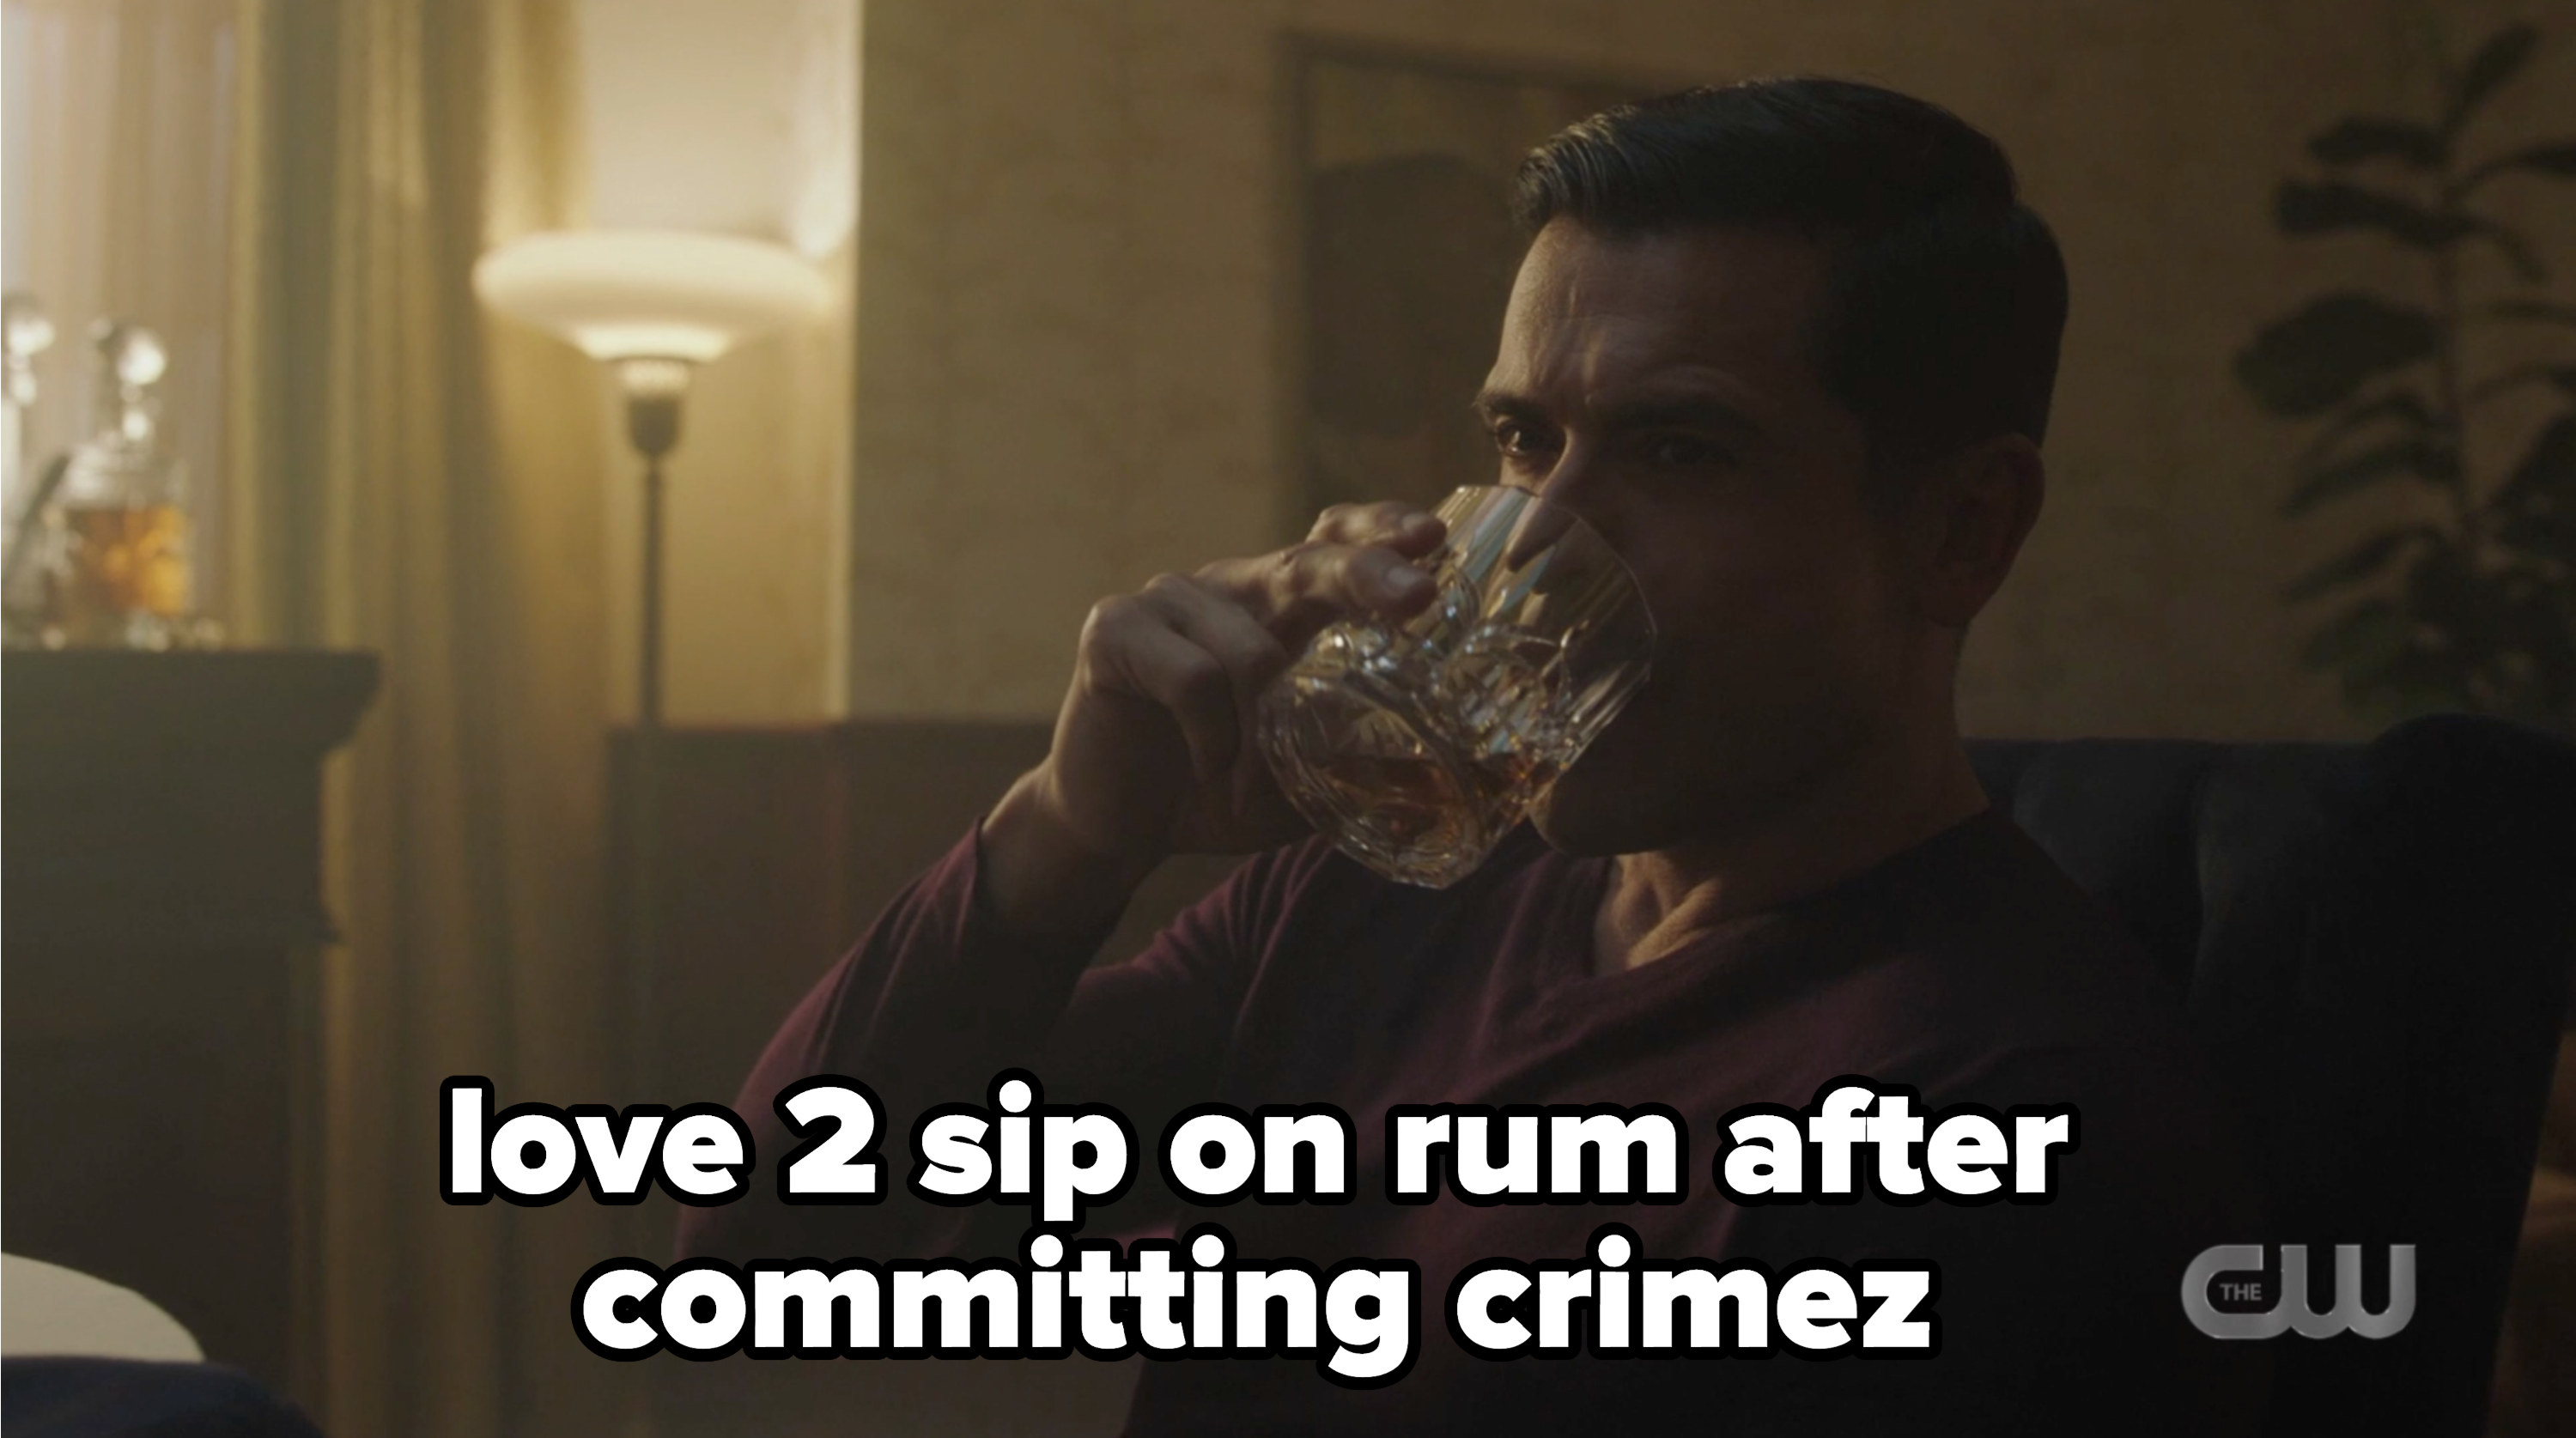 Hiram sipping on rum after committing crimes